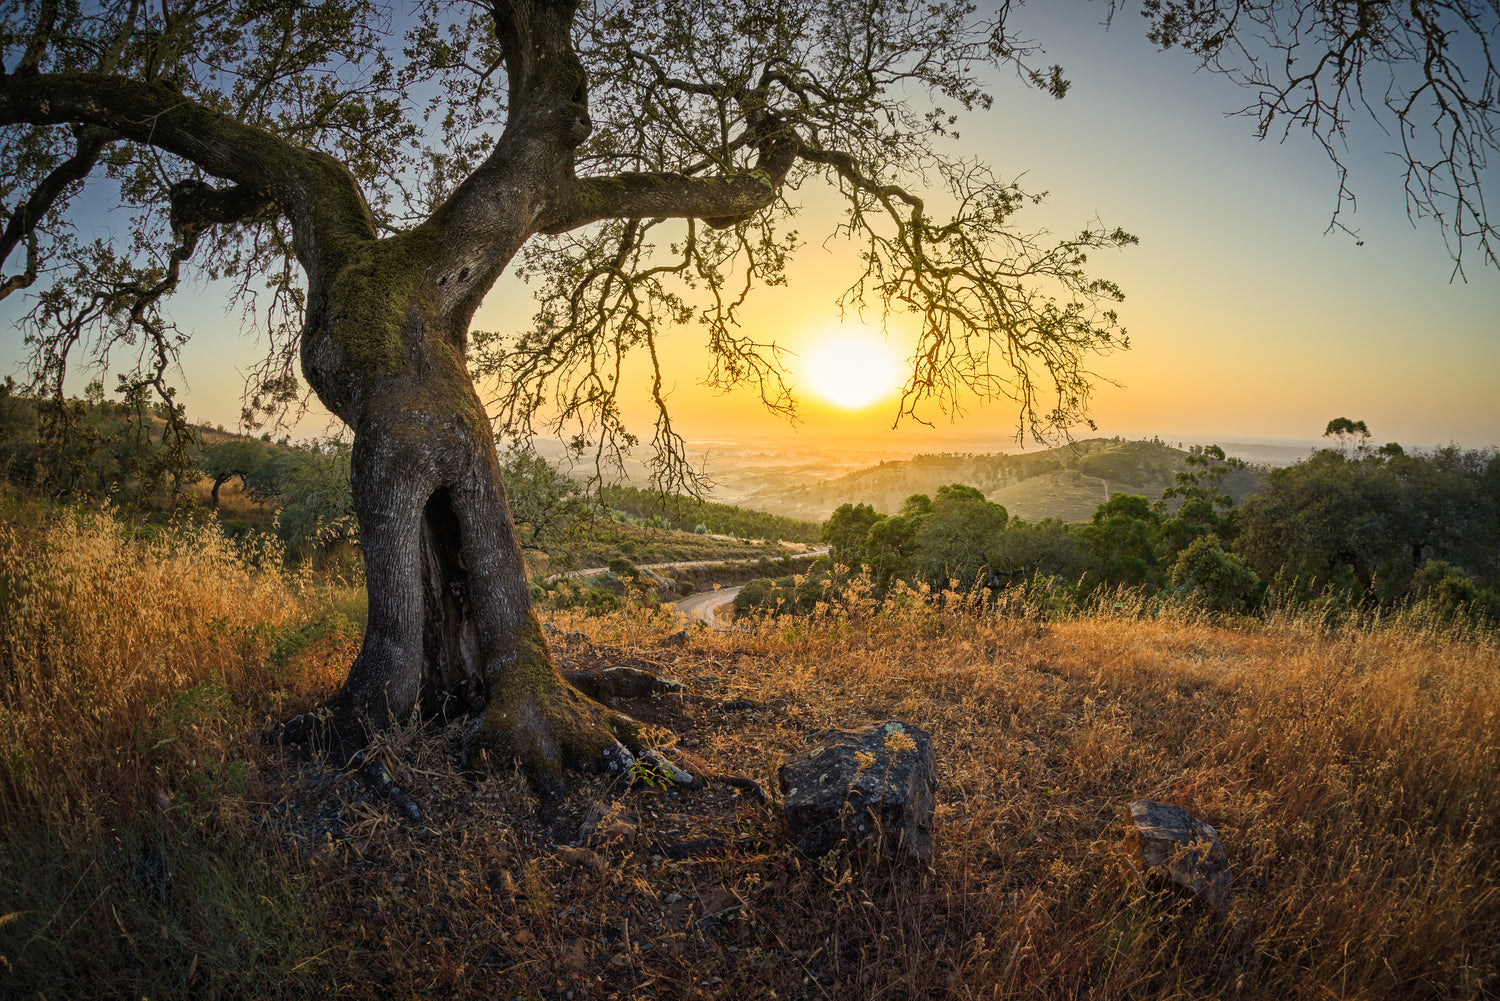 Legend of Olive Tree, and old Olive tree on a beautiful sunset.